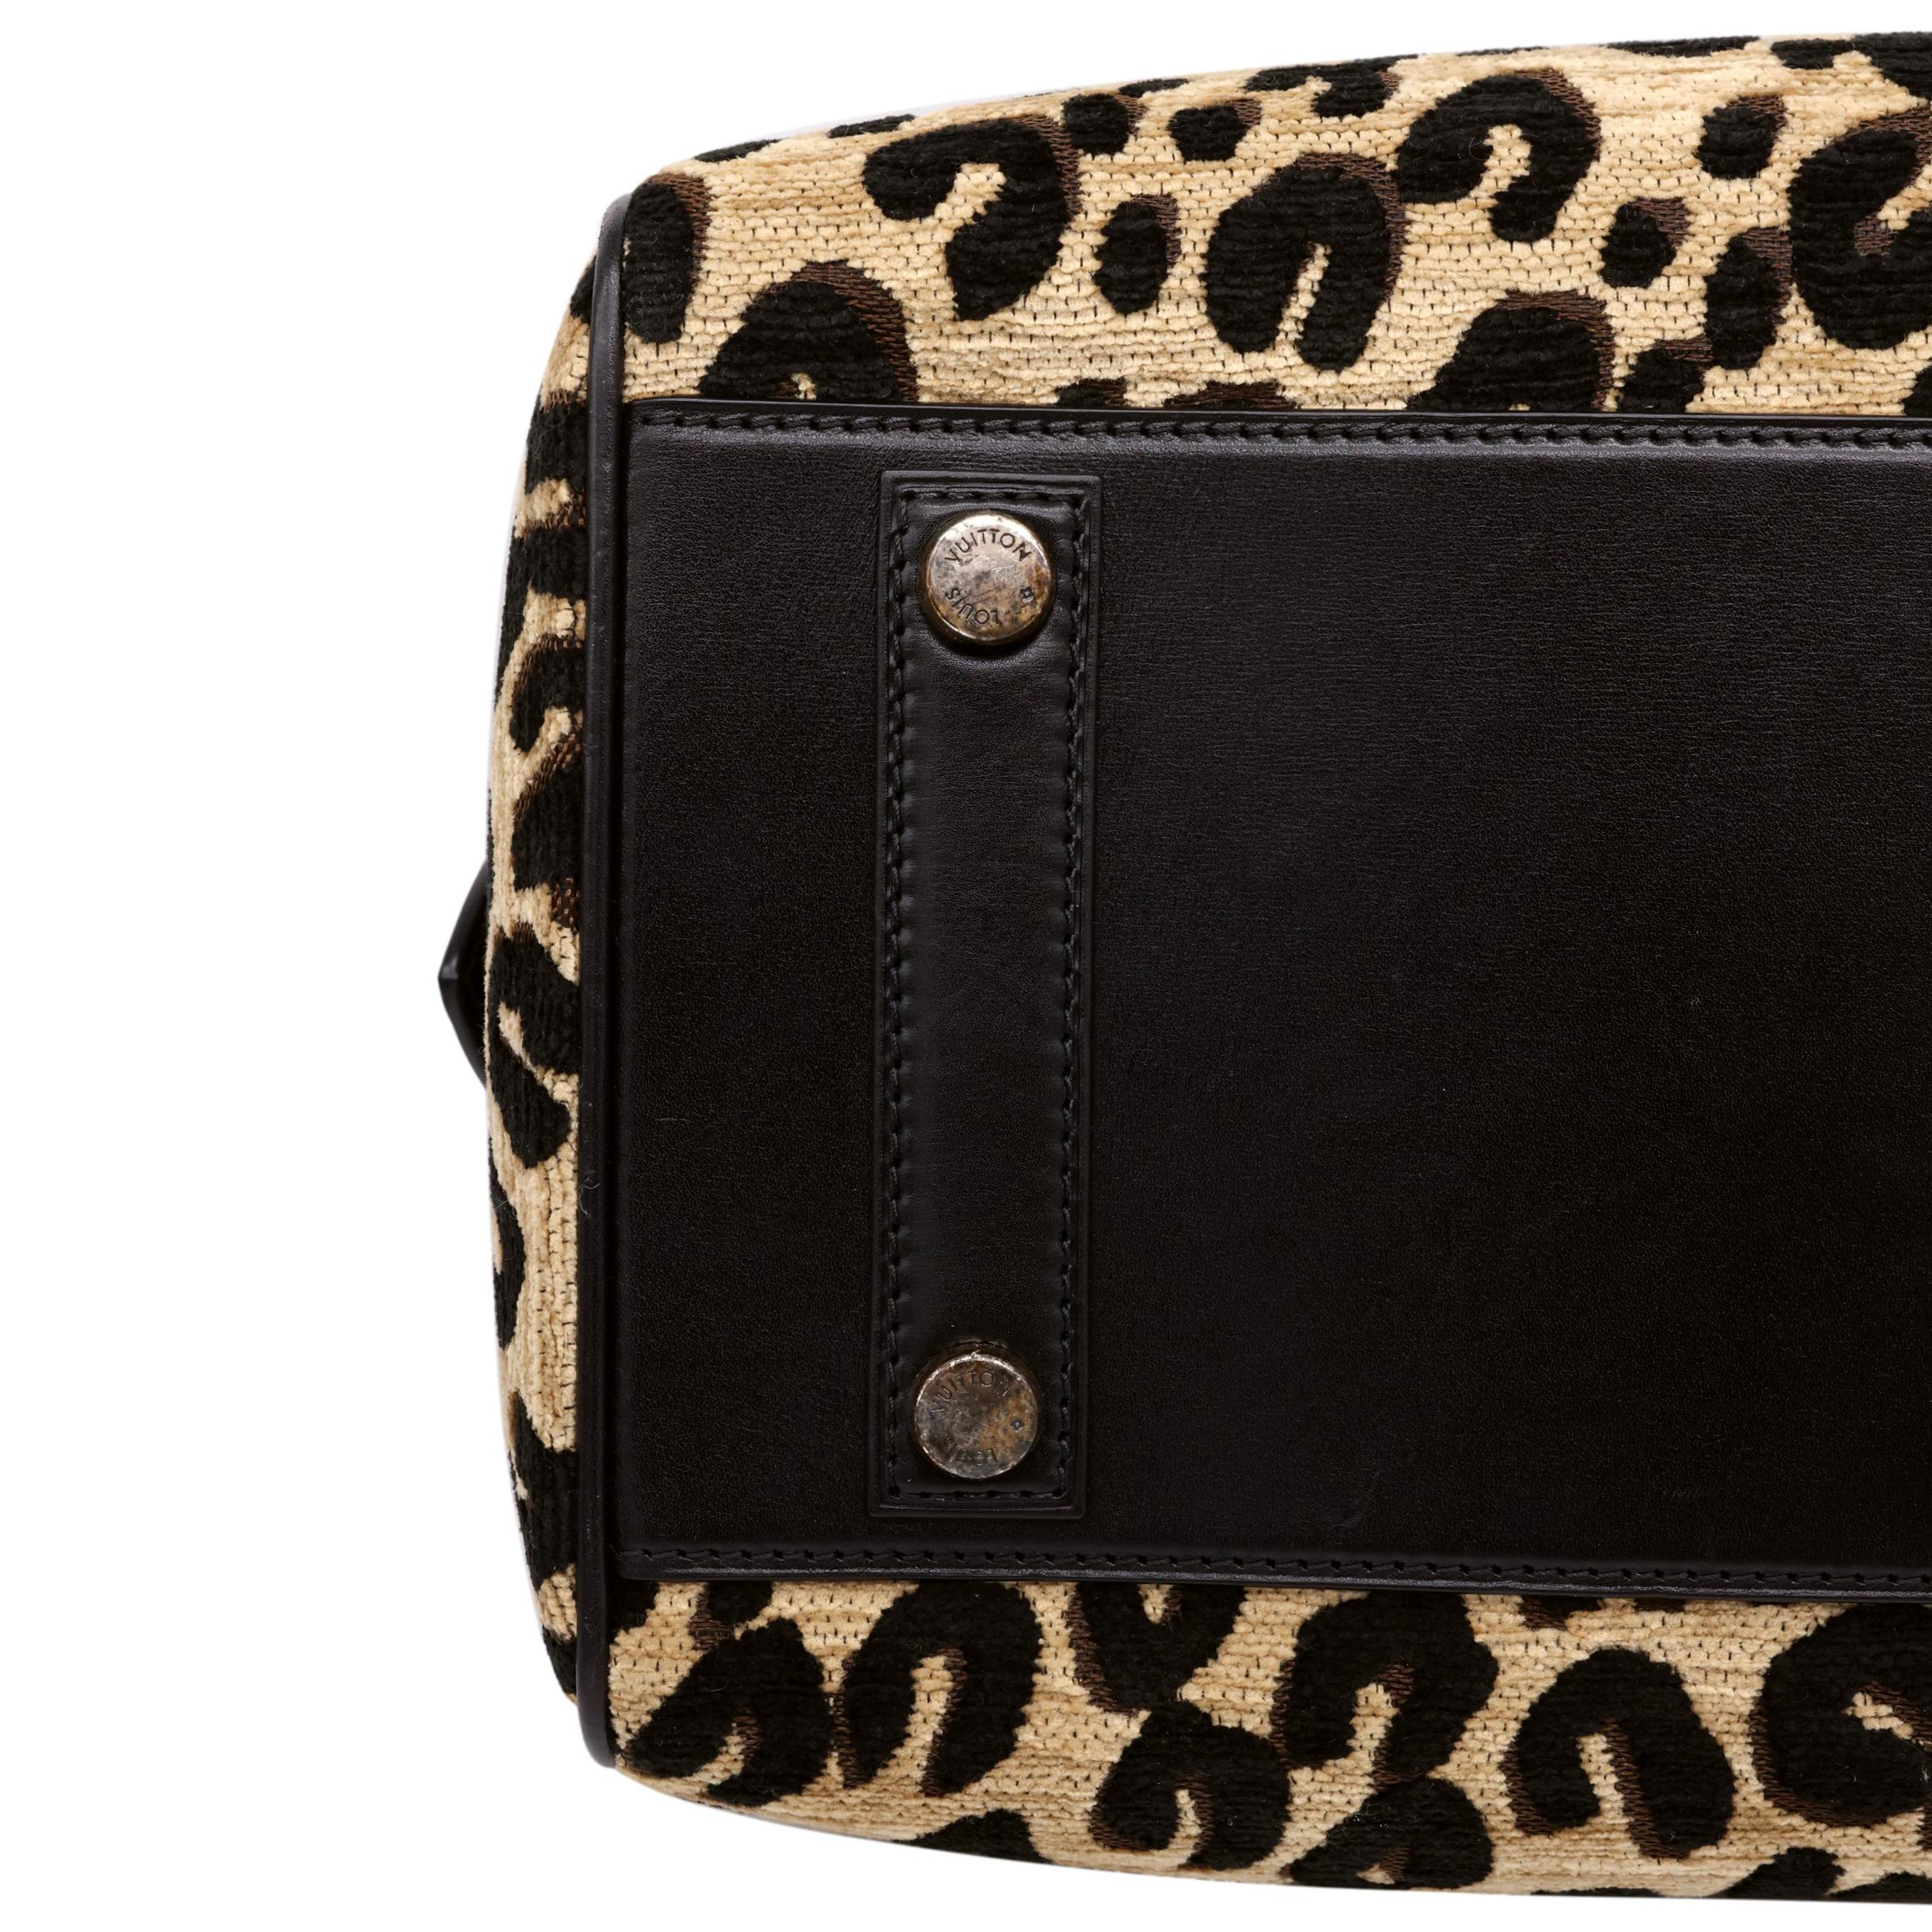 Limited Edition Louis Vuitton x Stephen Sprouse Leopard Speedy Bag, 2012. 2